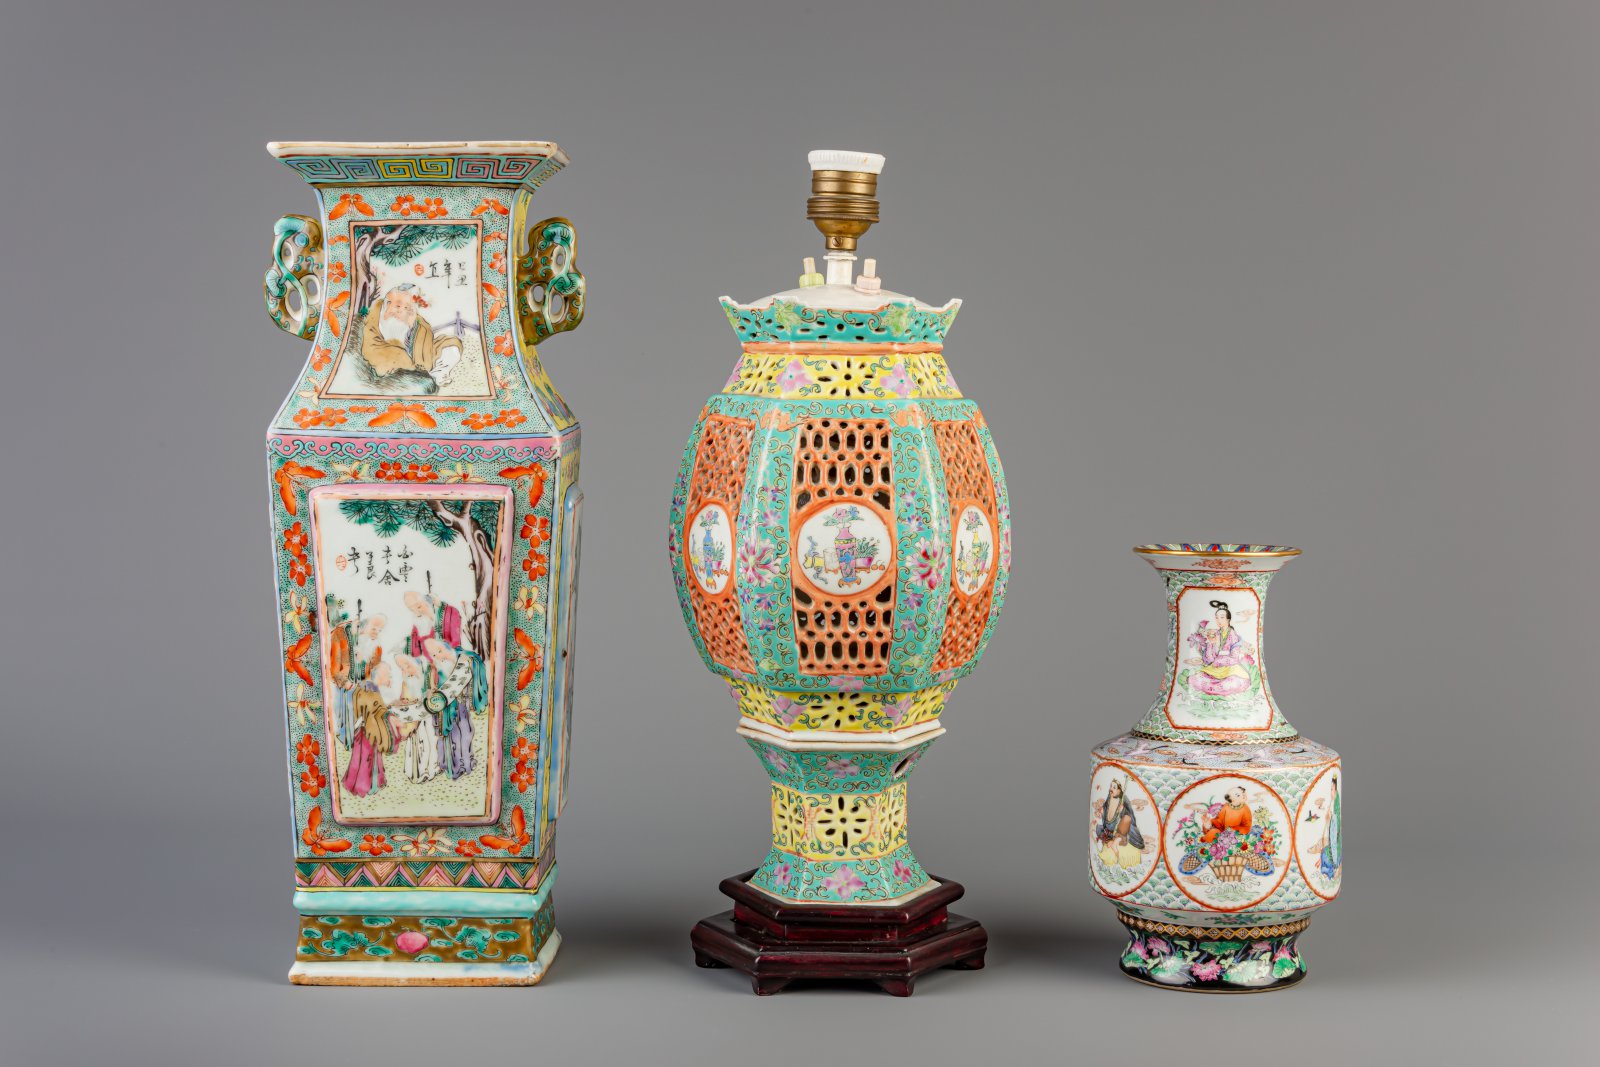 A Chinese famille rose lantern, an 'Immortals' vase and a vase with sages, 19th and 20th C. - Image 2 of 7